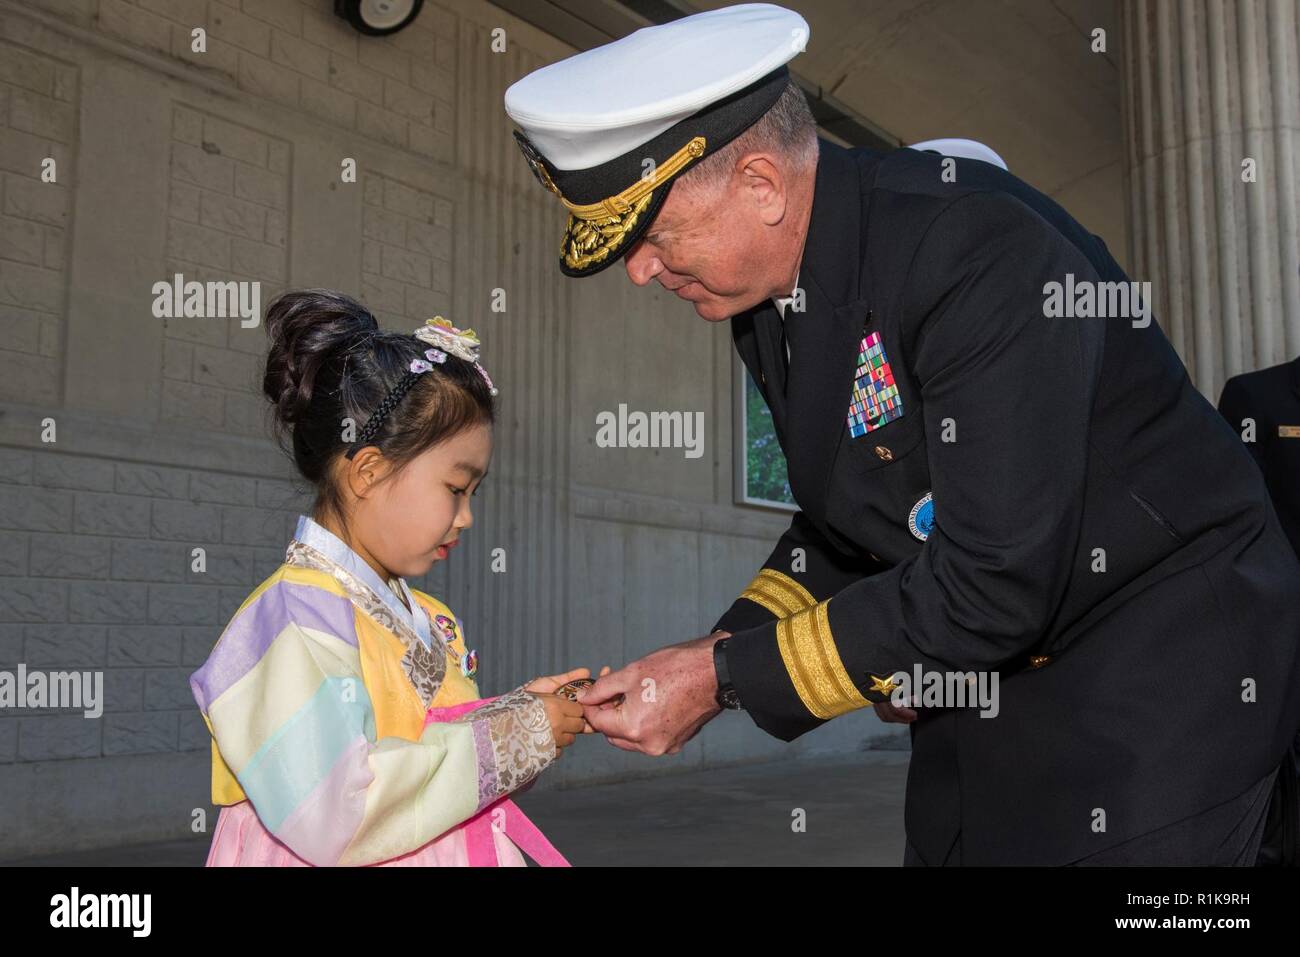 JEJU ISLAND, Republic of Korea, (Oct. 12, 2018) Rear Adm. Michael E. Boyle, commander, U.S. Naval Forces Korea (CNFK) presents a coin to a young girl during a welcome ceremony at the Republic of Korea (ROK) Navy base in Jeju. CNFK is the U.S. Navy's representative in the ROK, providing leadership and expertise in naval matters to improve institutional and operational effectiveness between the two navies and to strengthen collective security efforts in Korea and the region. Stock Photo